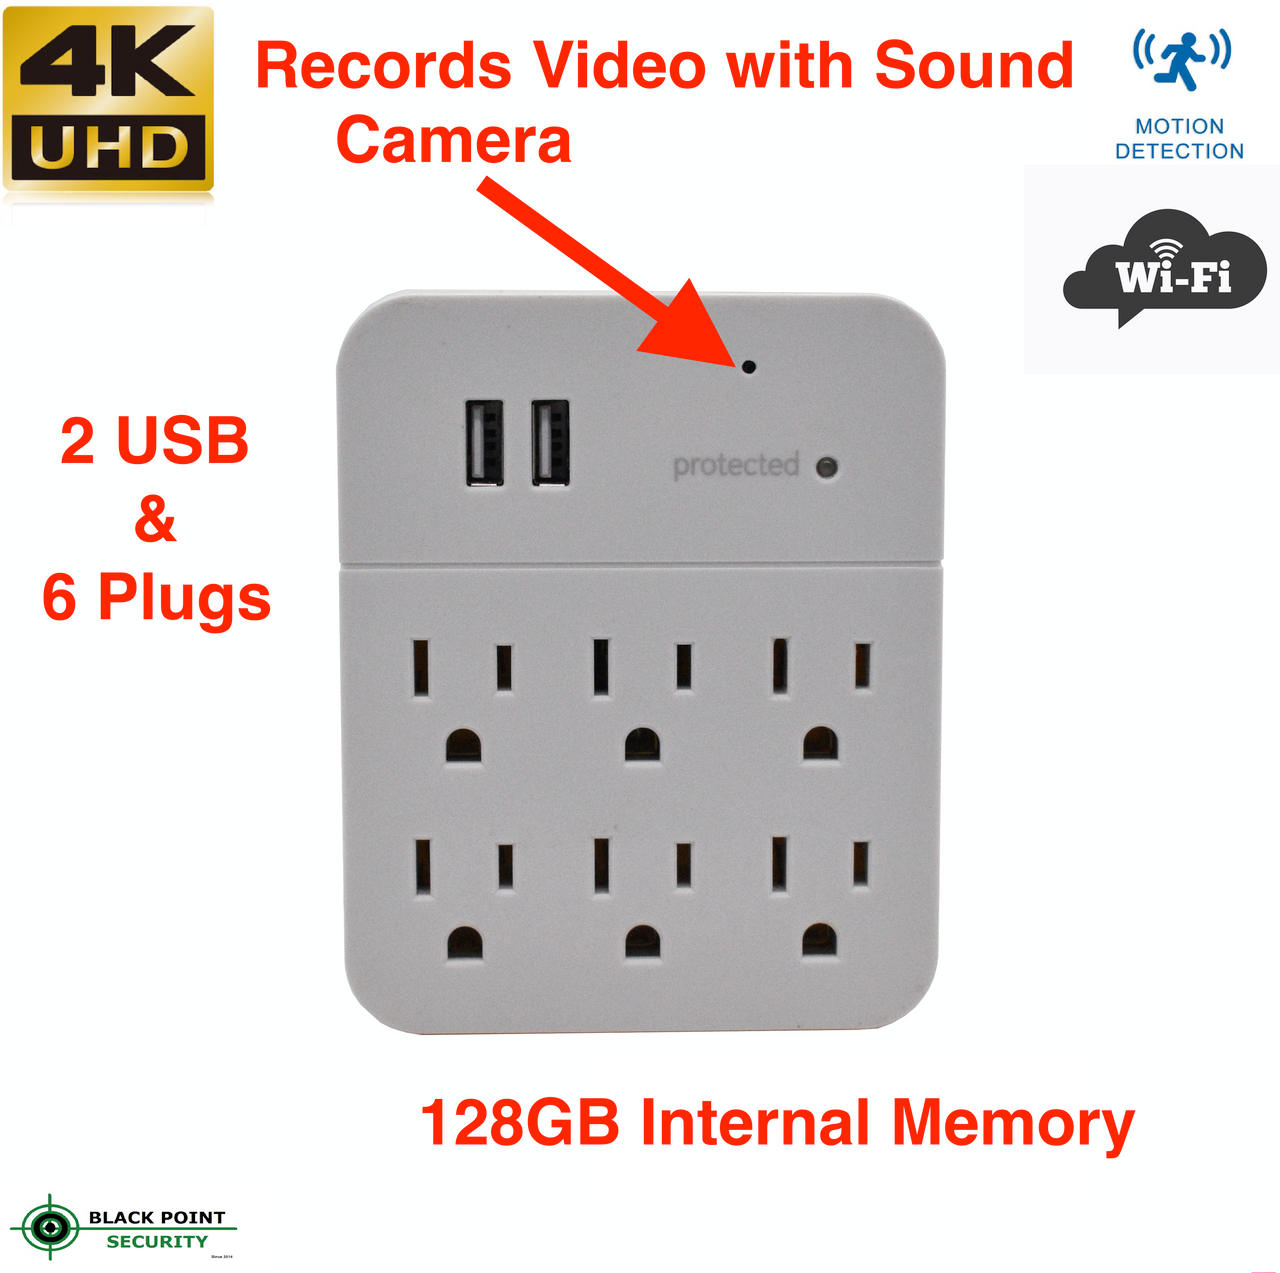 6 Plug Outlet with 2 USB Ports Hidden Streaming WIFI Camera